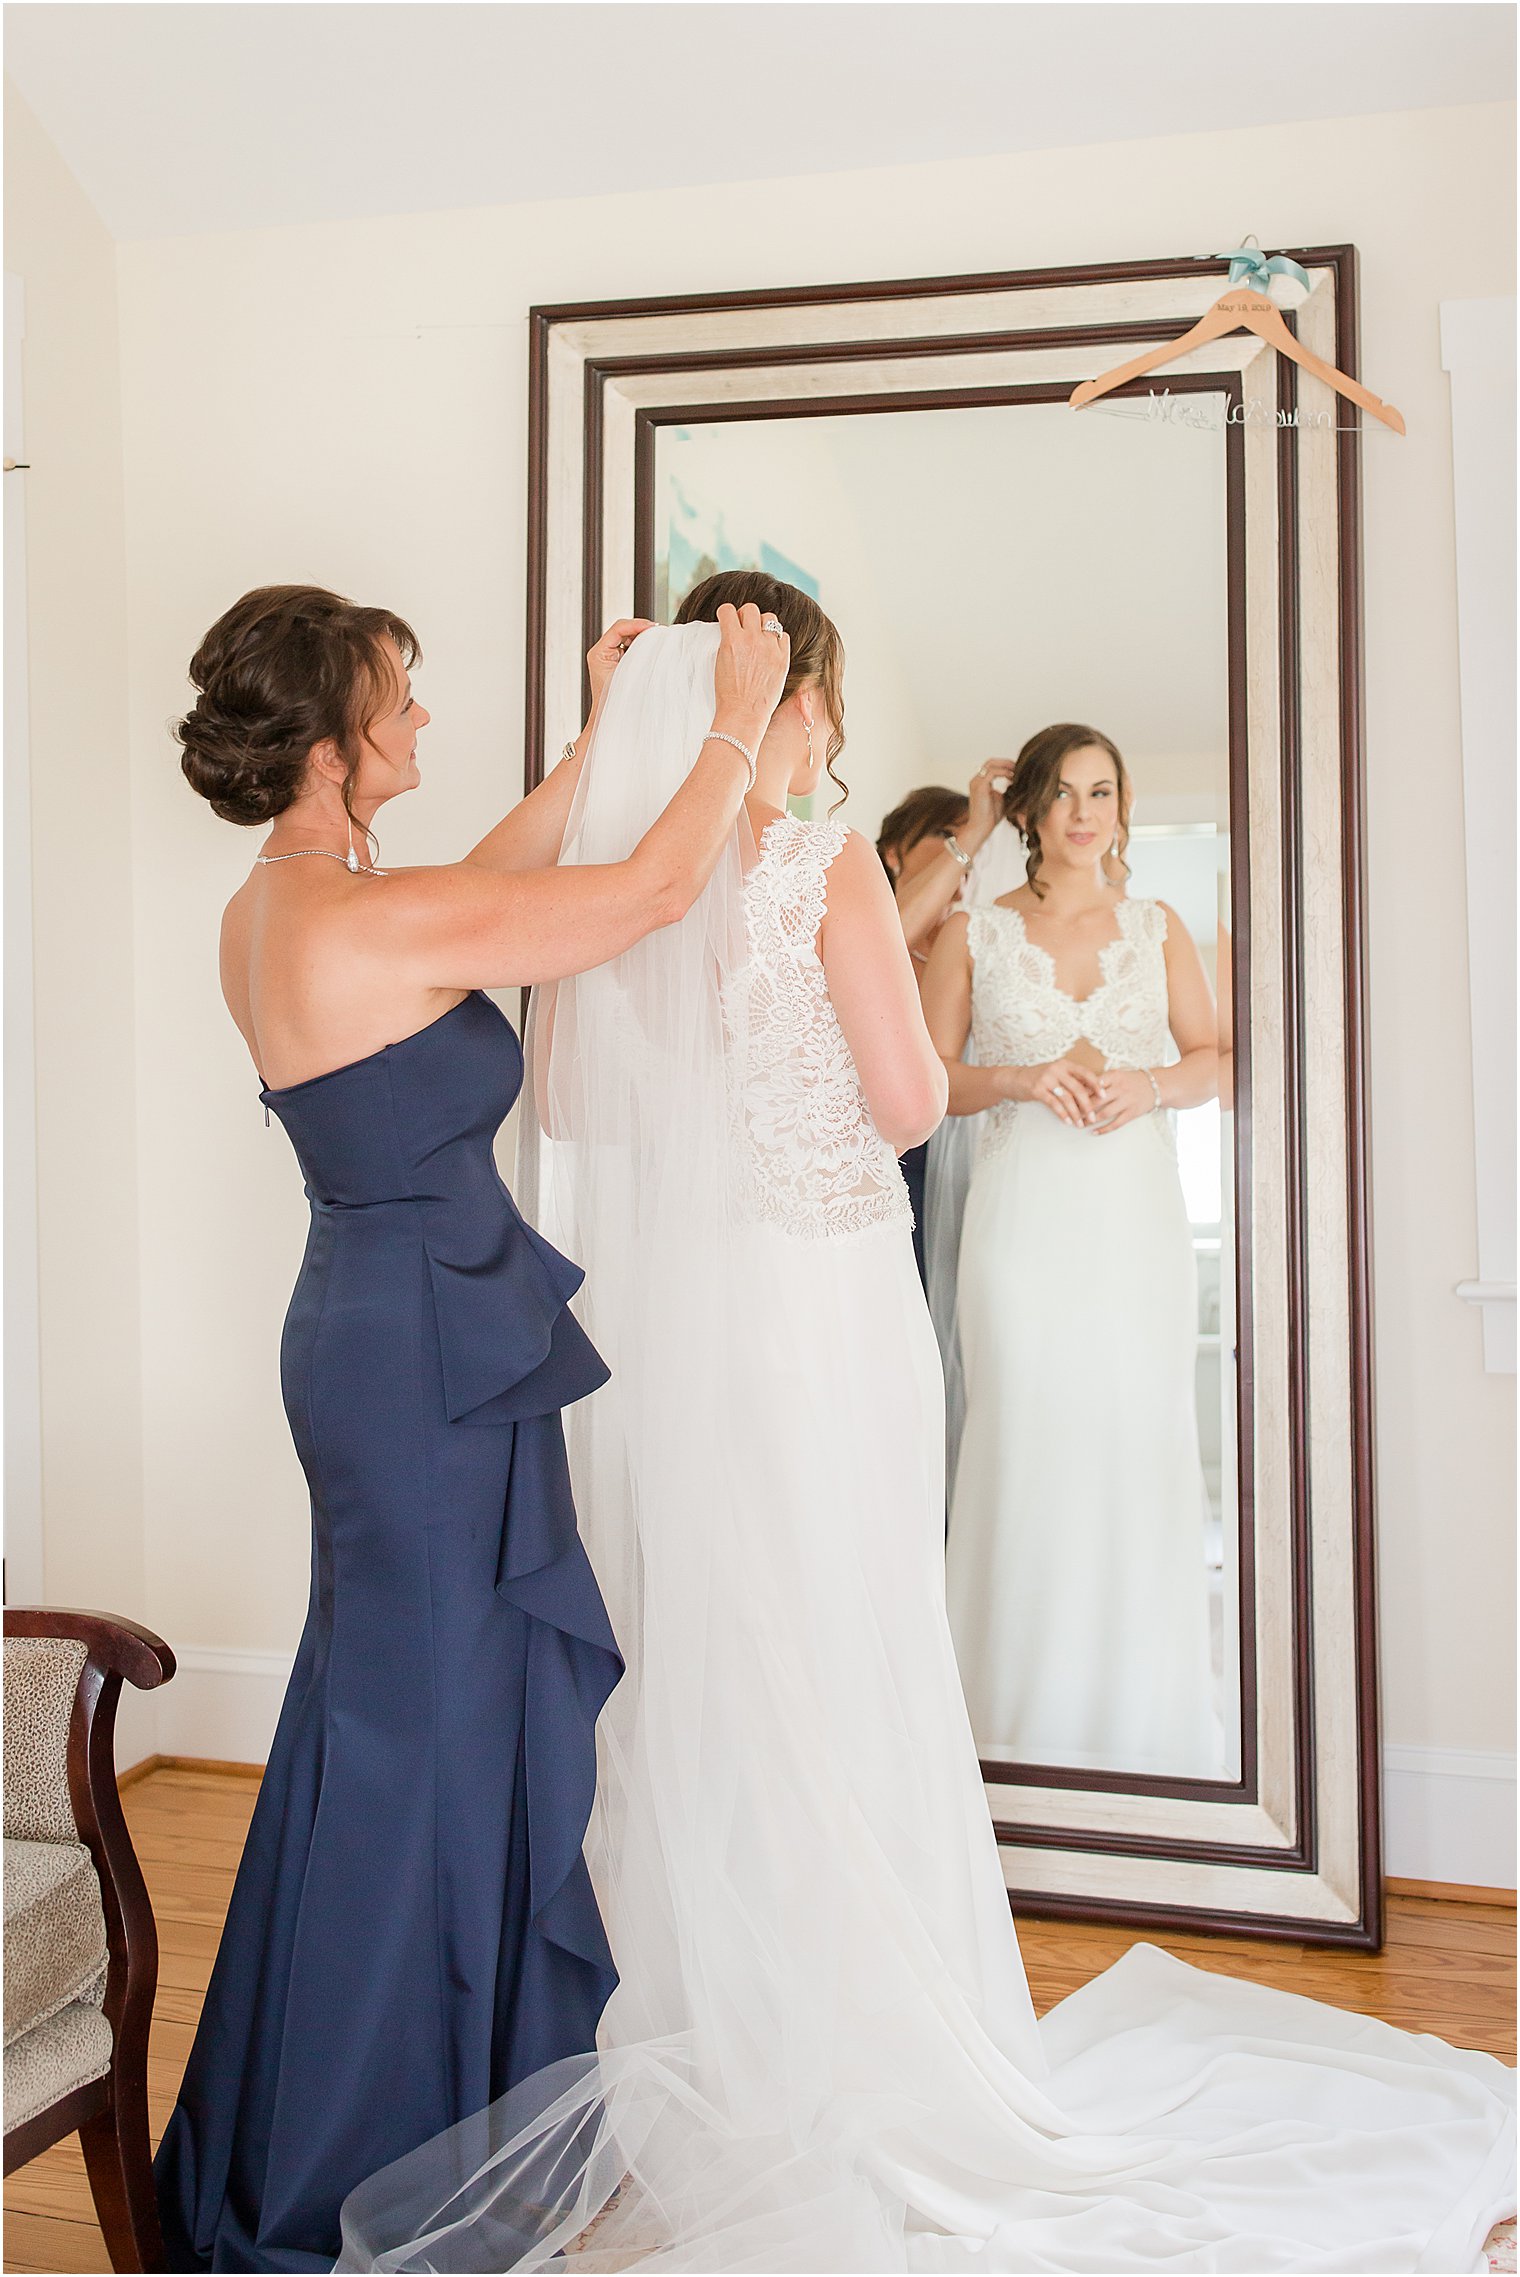 A Guide to Mother-of-The-Bride Duties